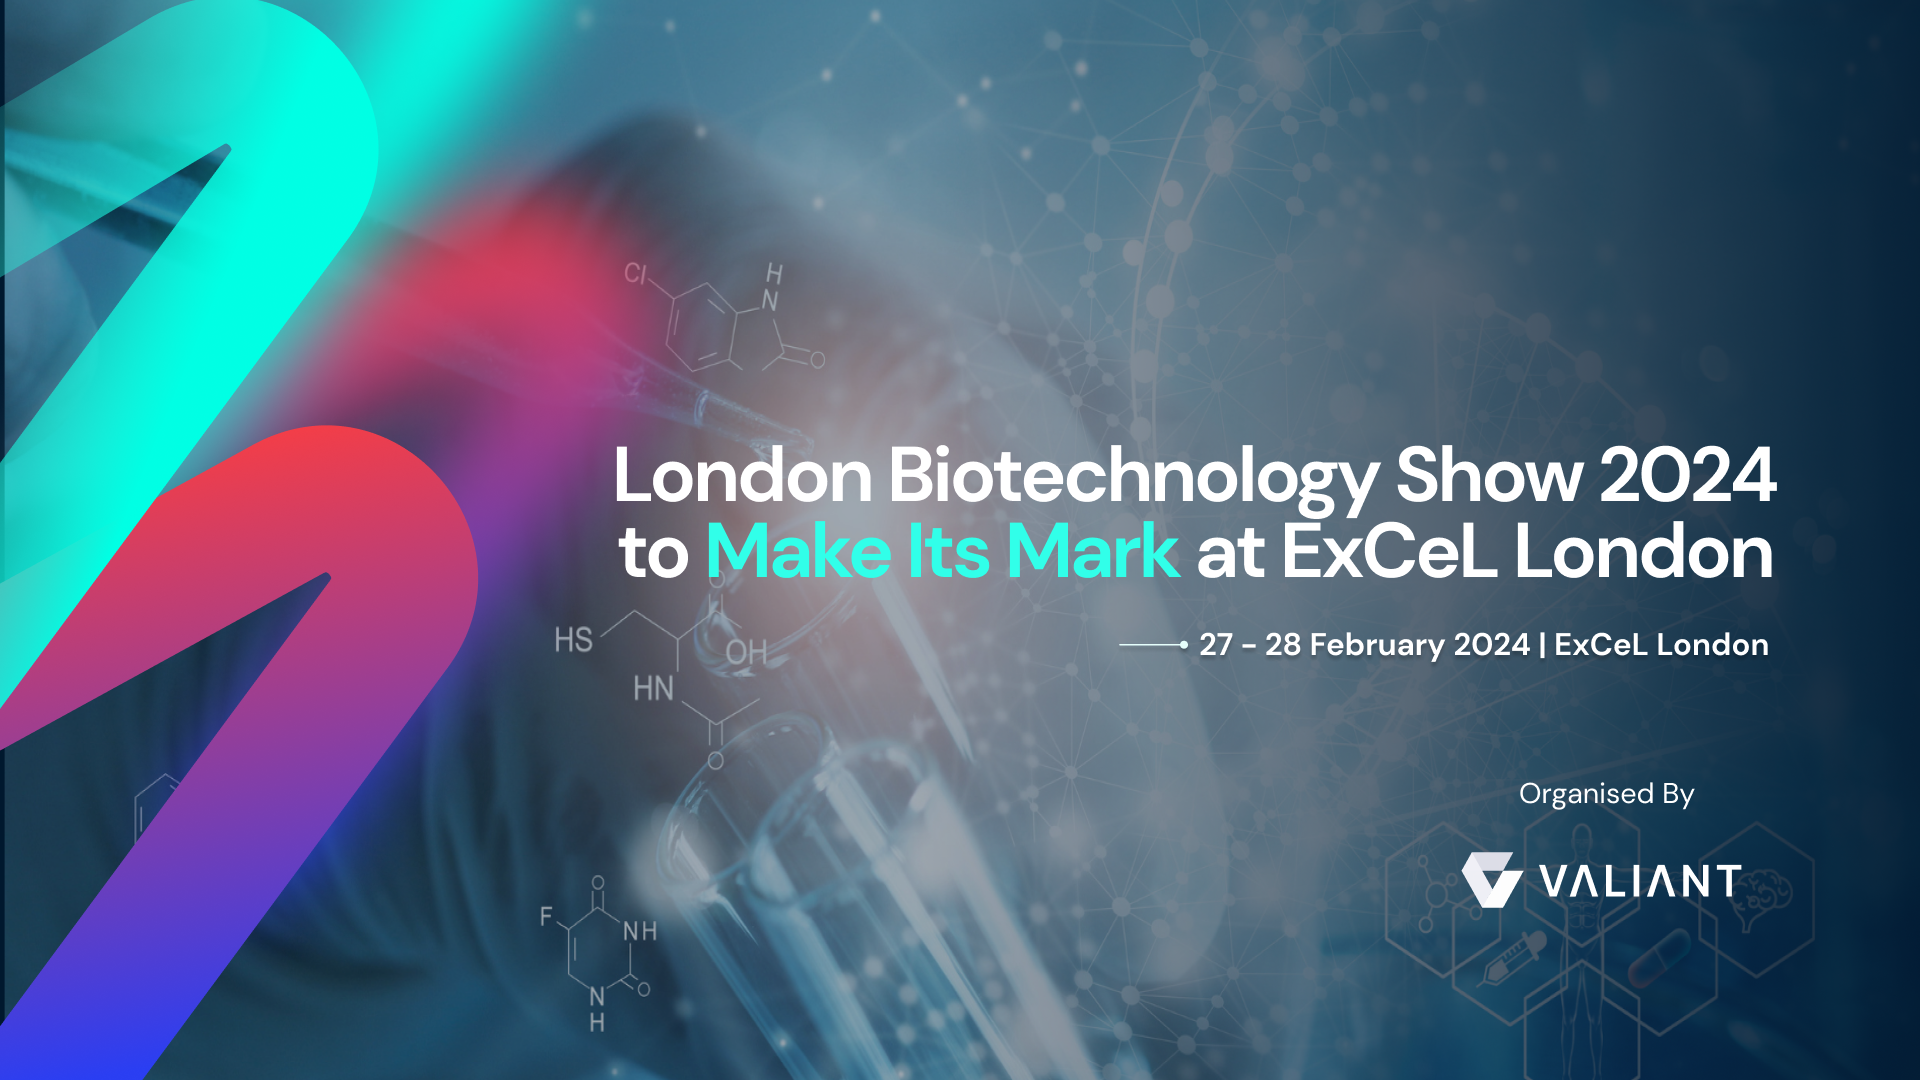 London Biotechnology Show 2024 To Make Its Mark At ExCeL London